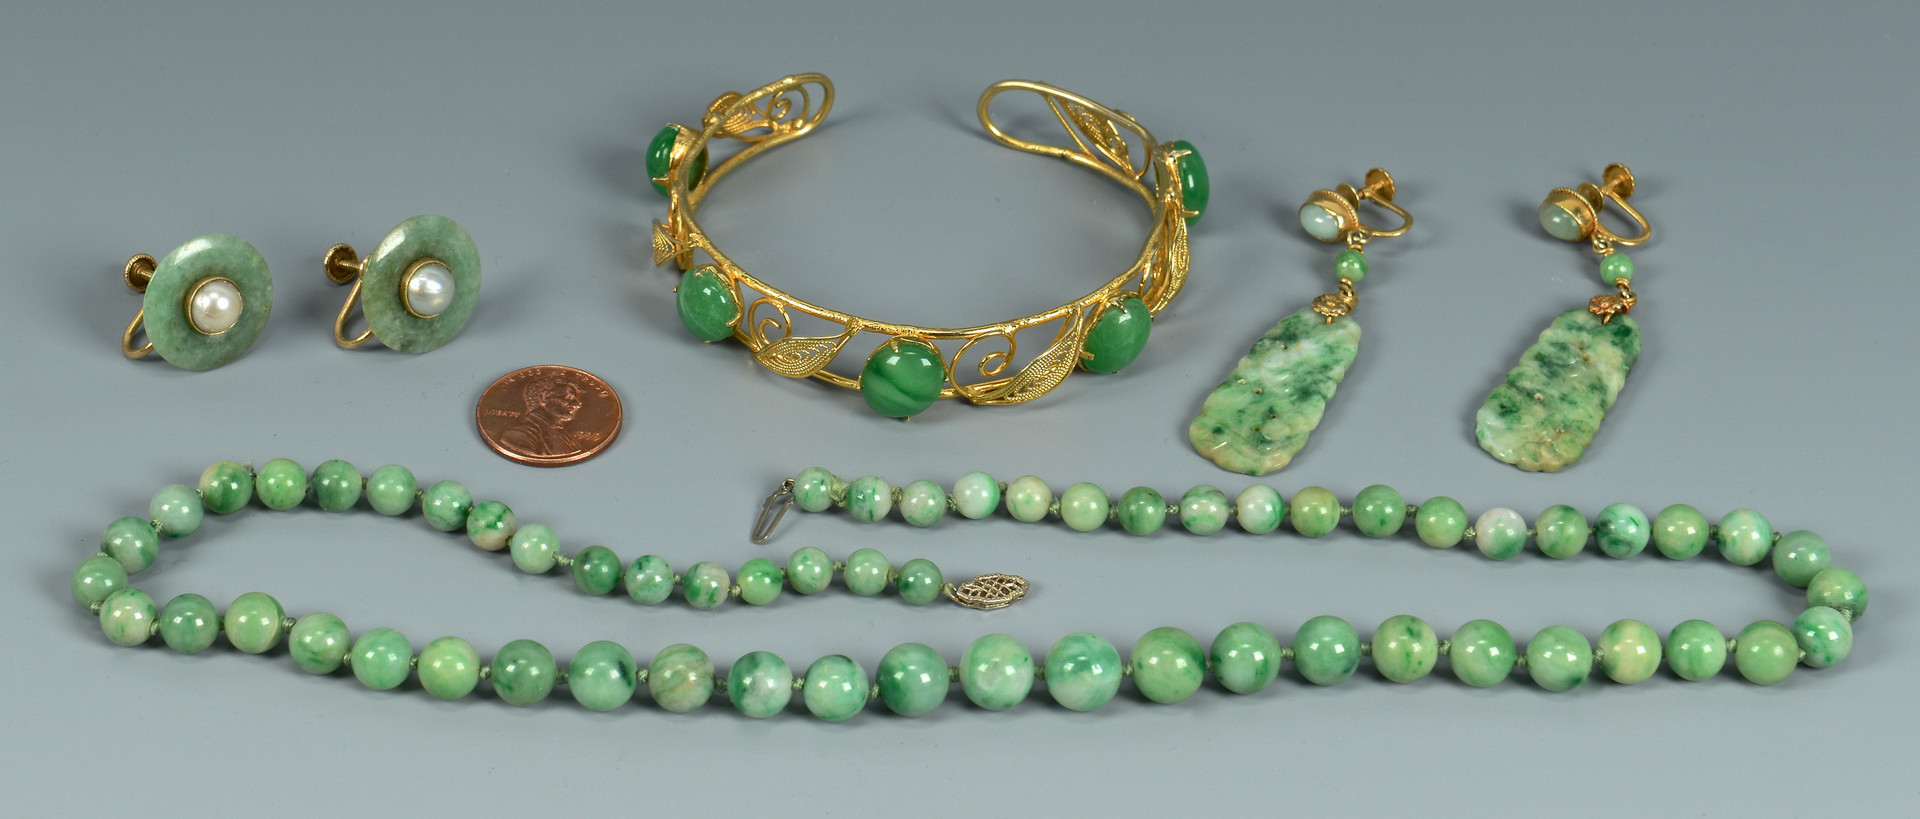 Lot 18: Grouping of Jade Jewelry, 4 items